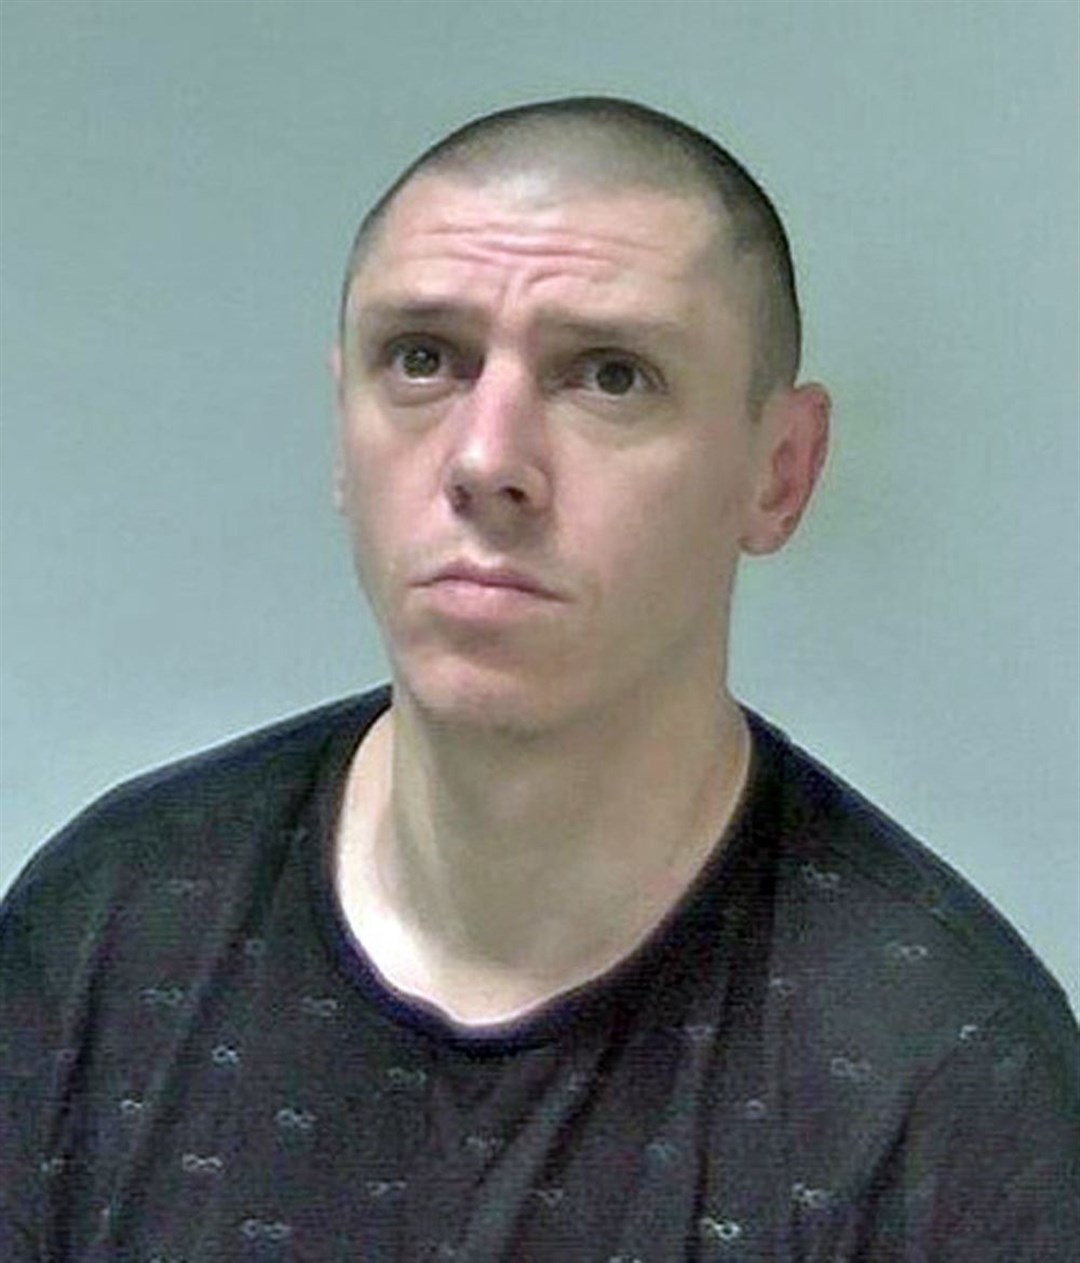 Alfie’s stepfather Dirk Howell was jailed for his murder (West Mercia Police/PA)